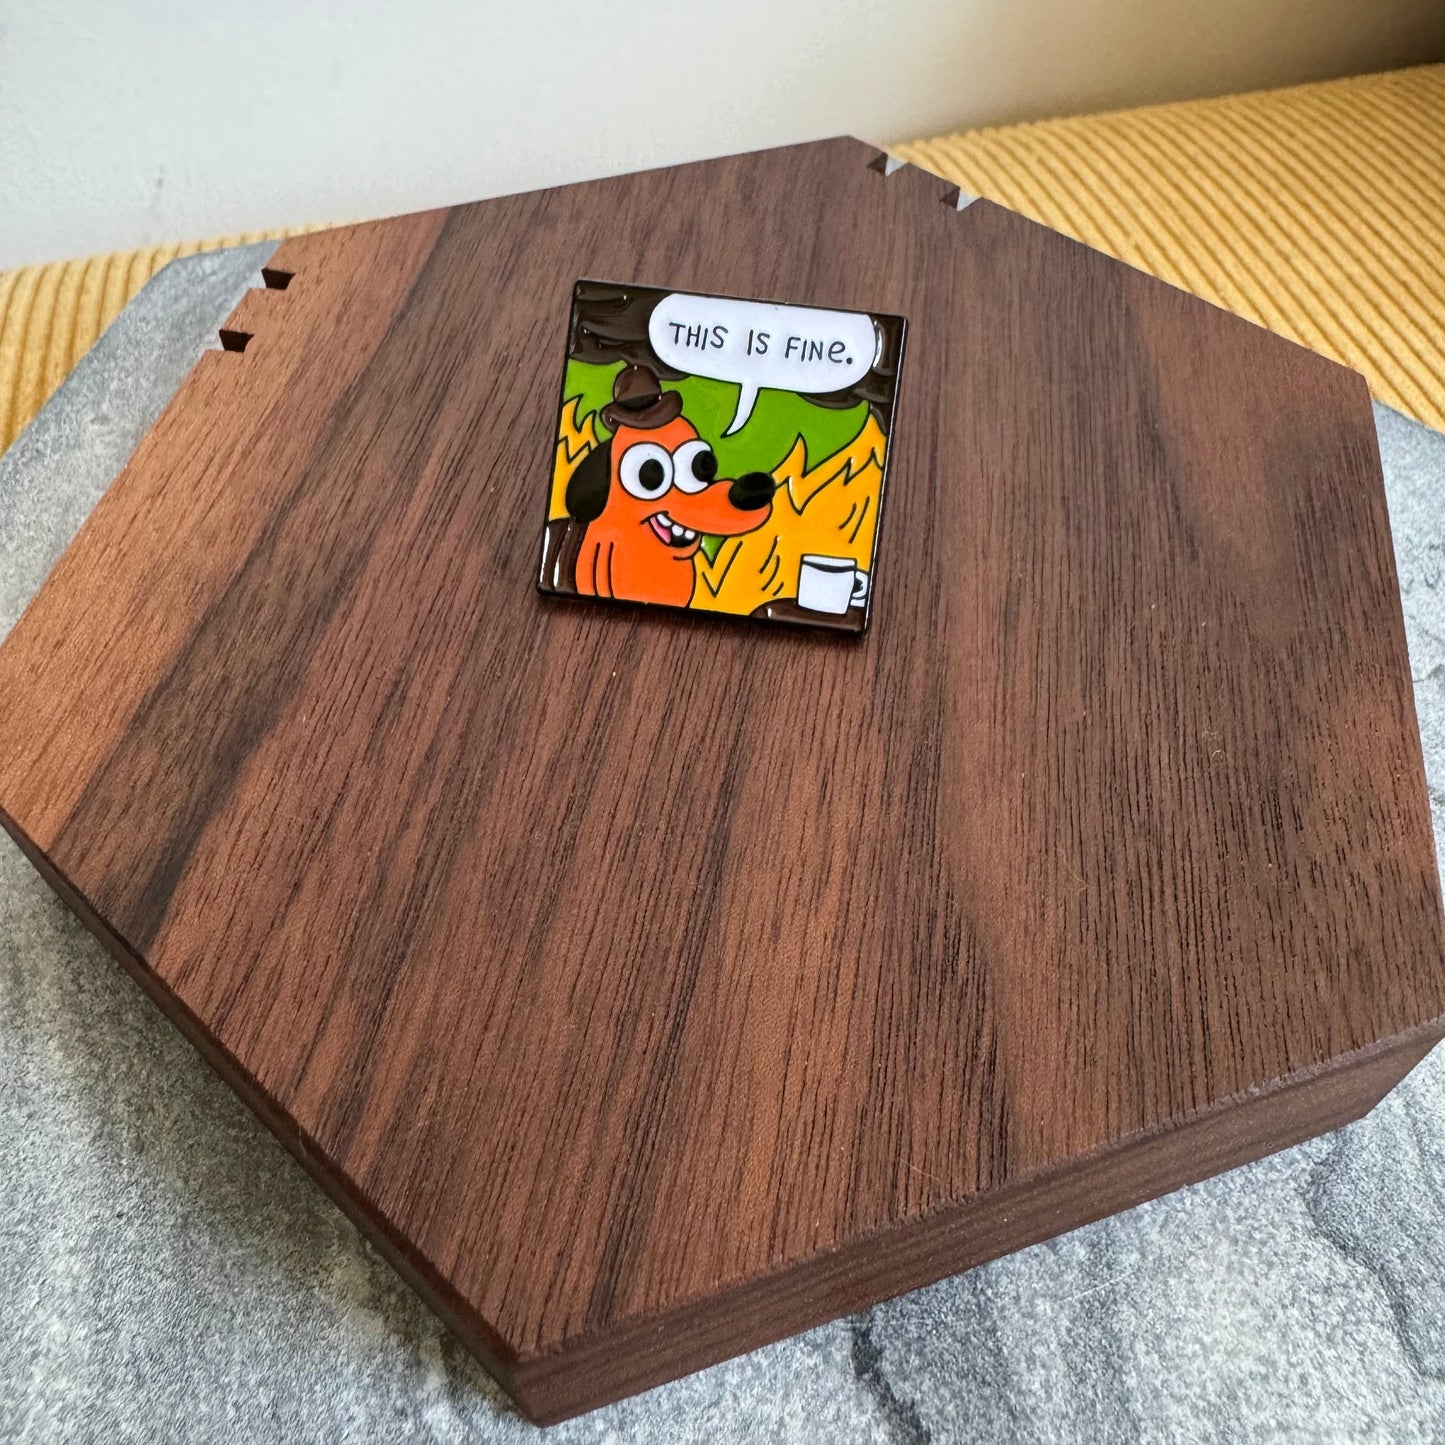 Pin - This Is Fine, Square